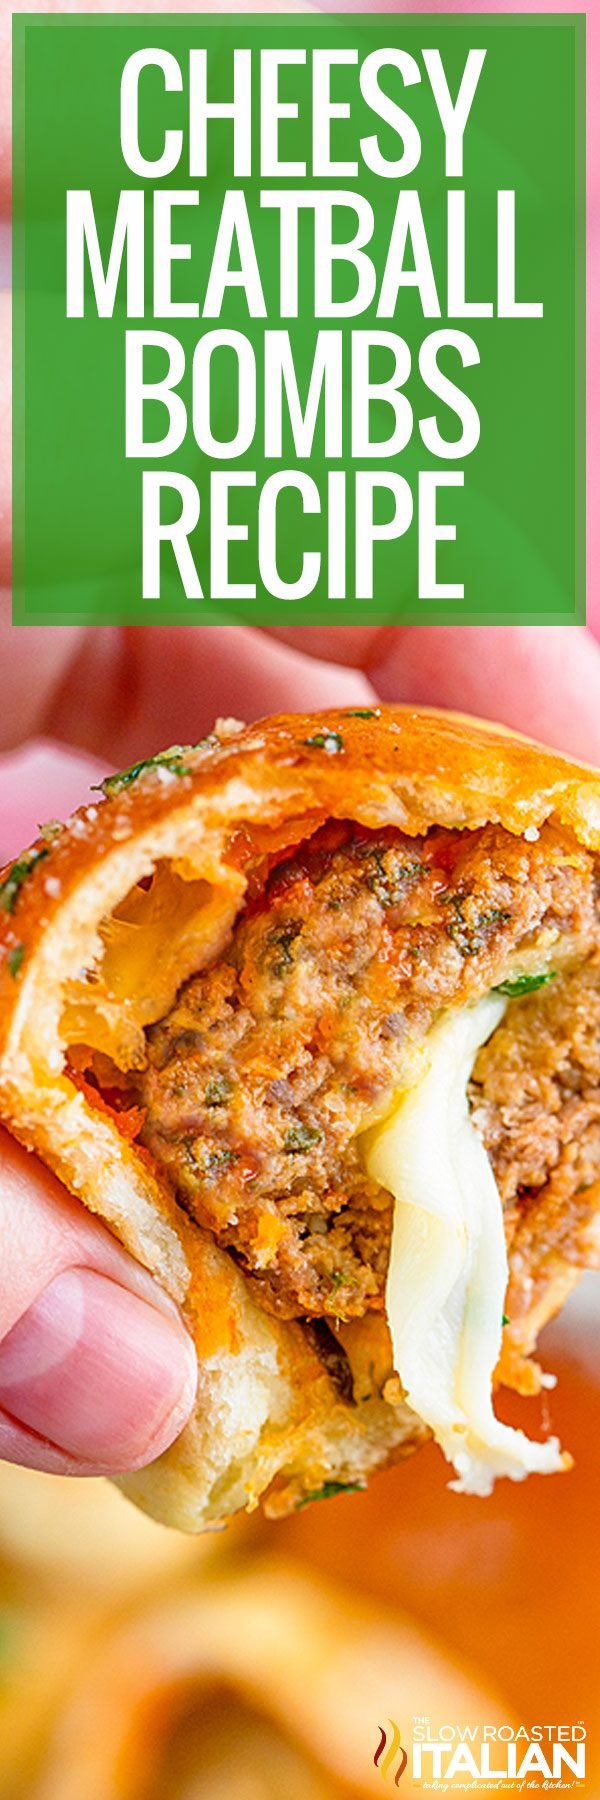 Title text (being held): Cheesy Meatball Bombs